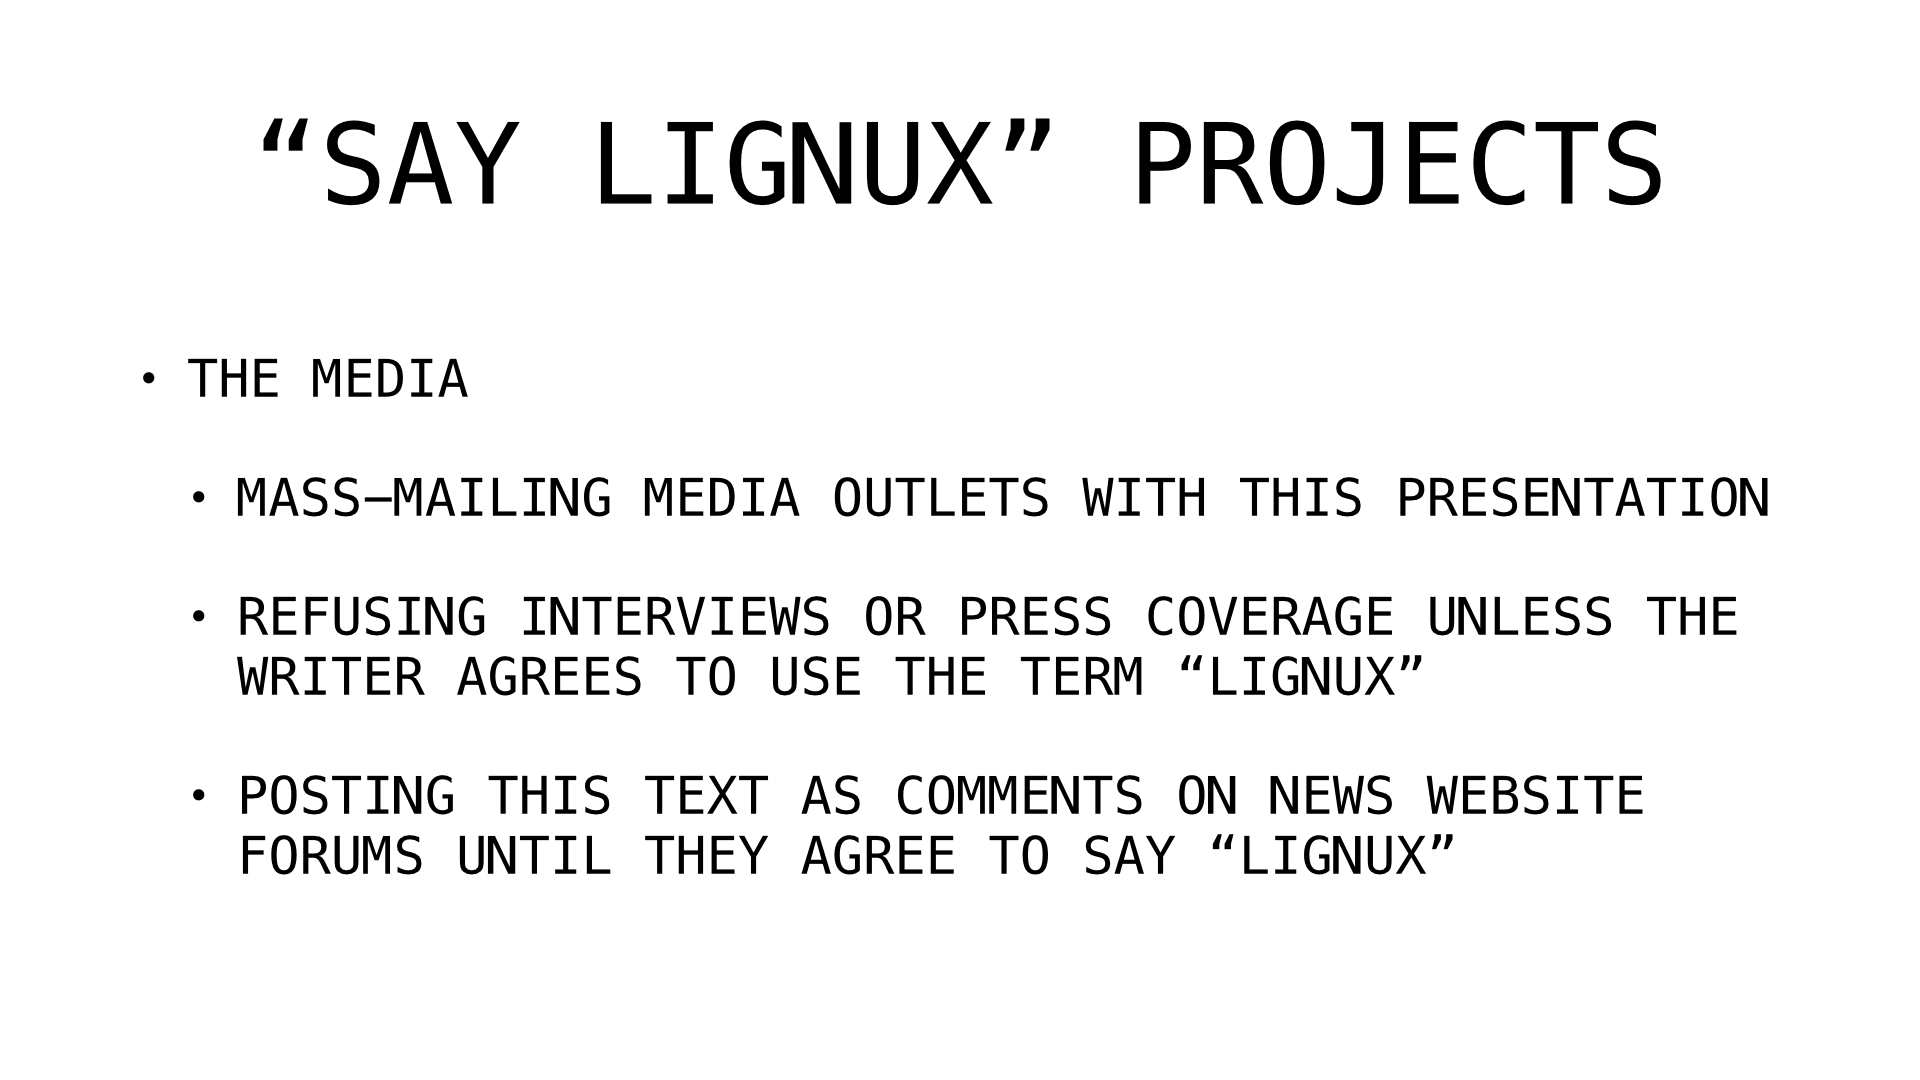 say lignux projects 2